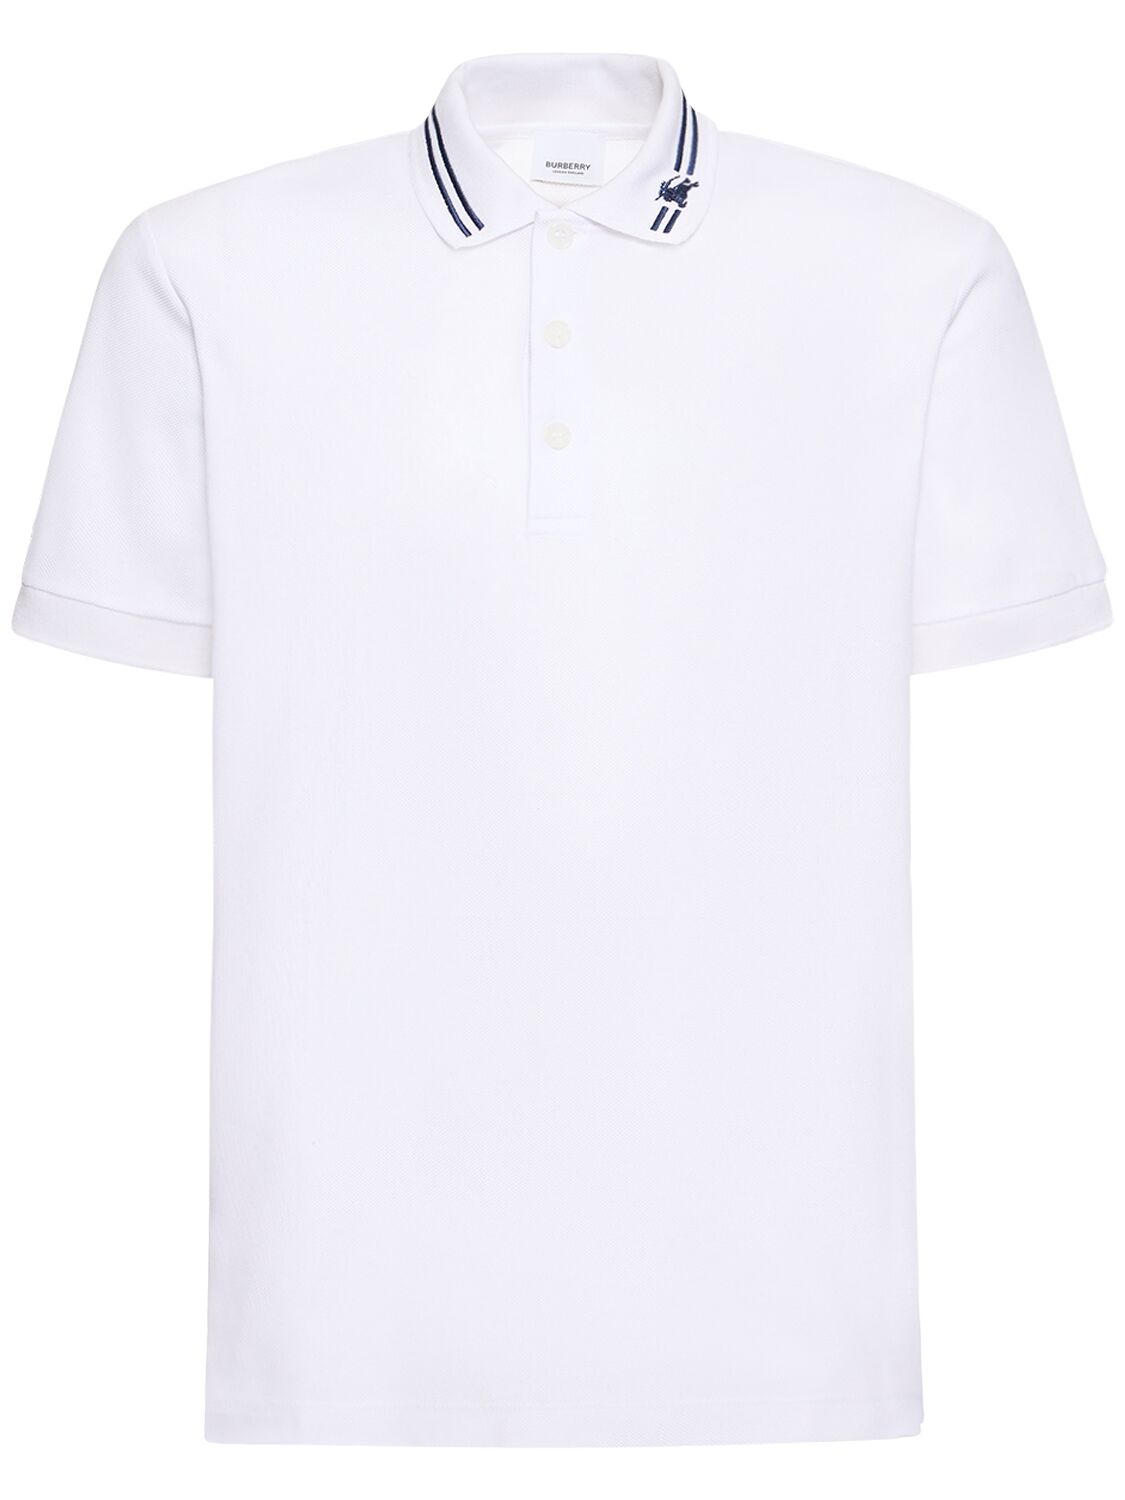 Image of Manor Embroidered Core Fit Cotton Polo